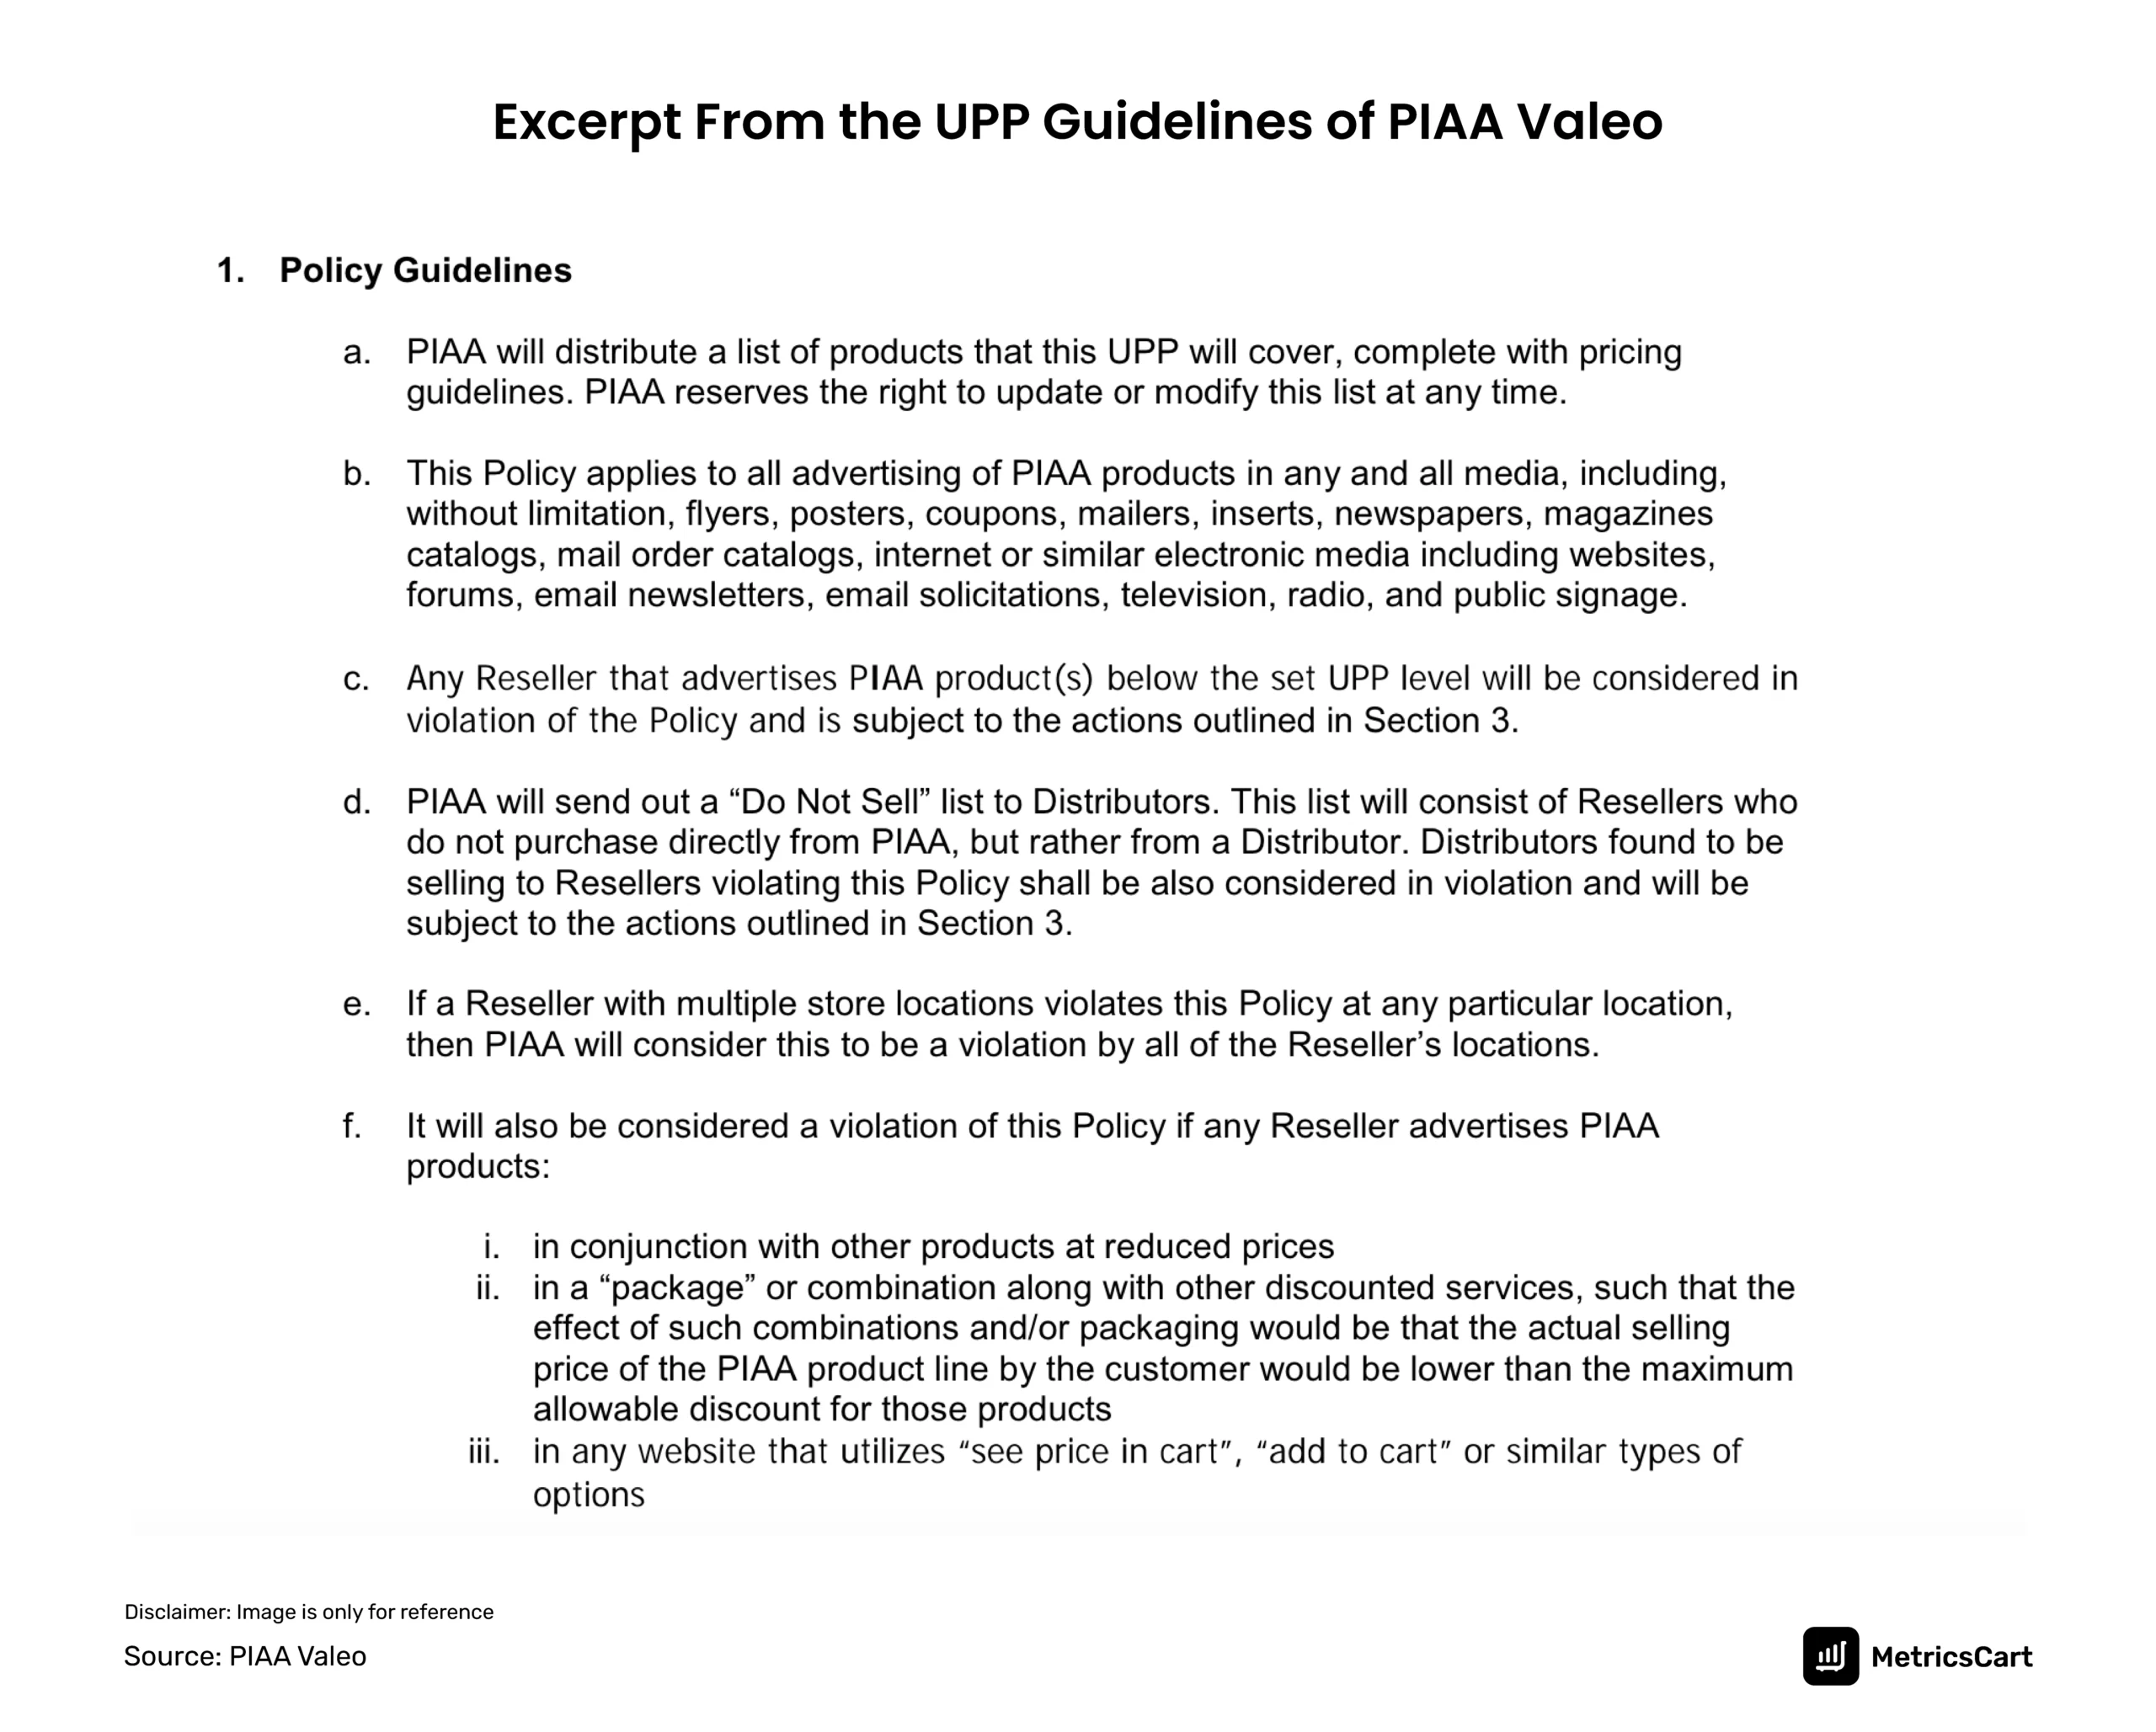 An excerpt from the UPP of PIAA Valeo